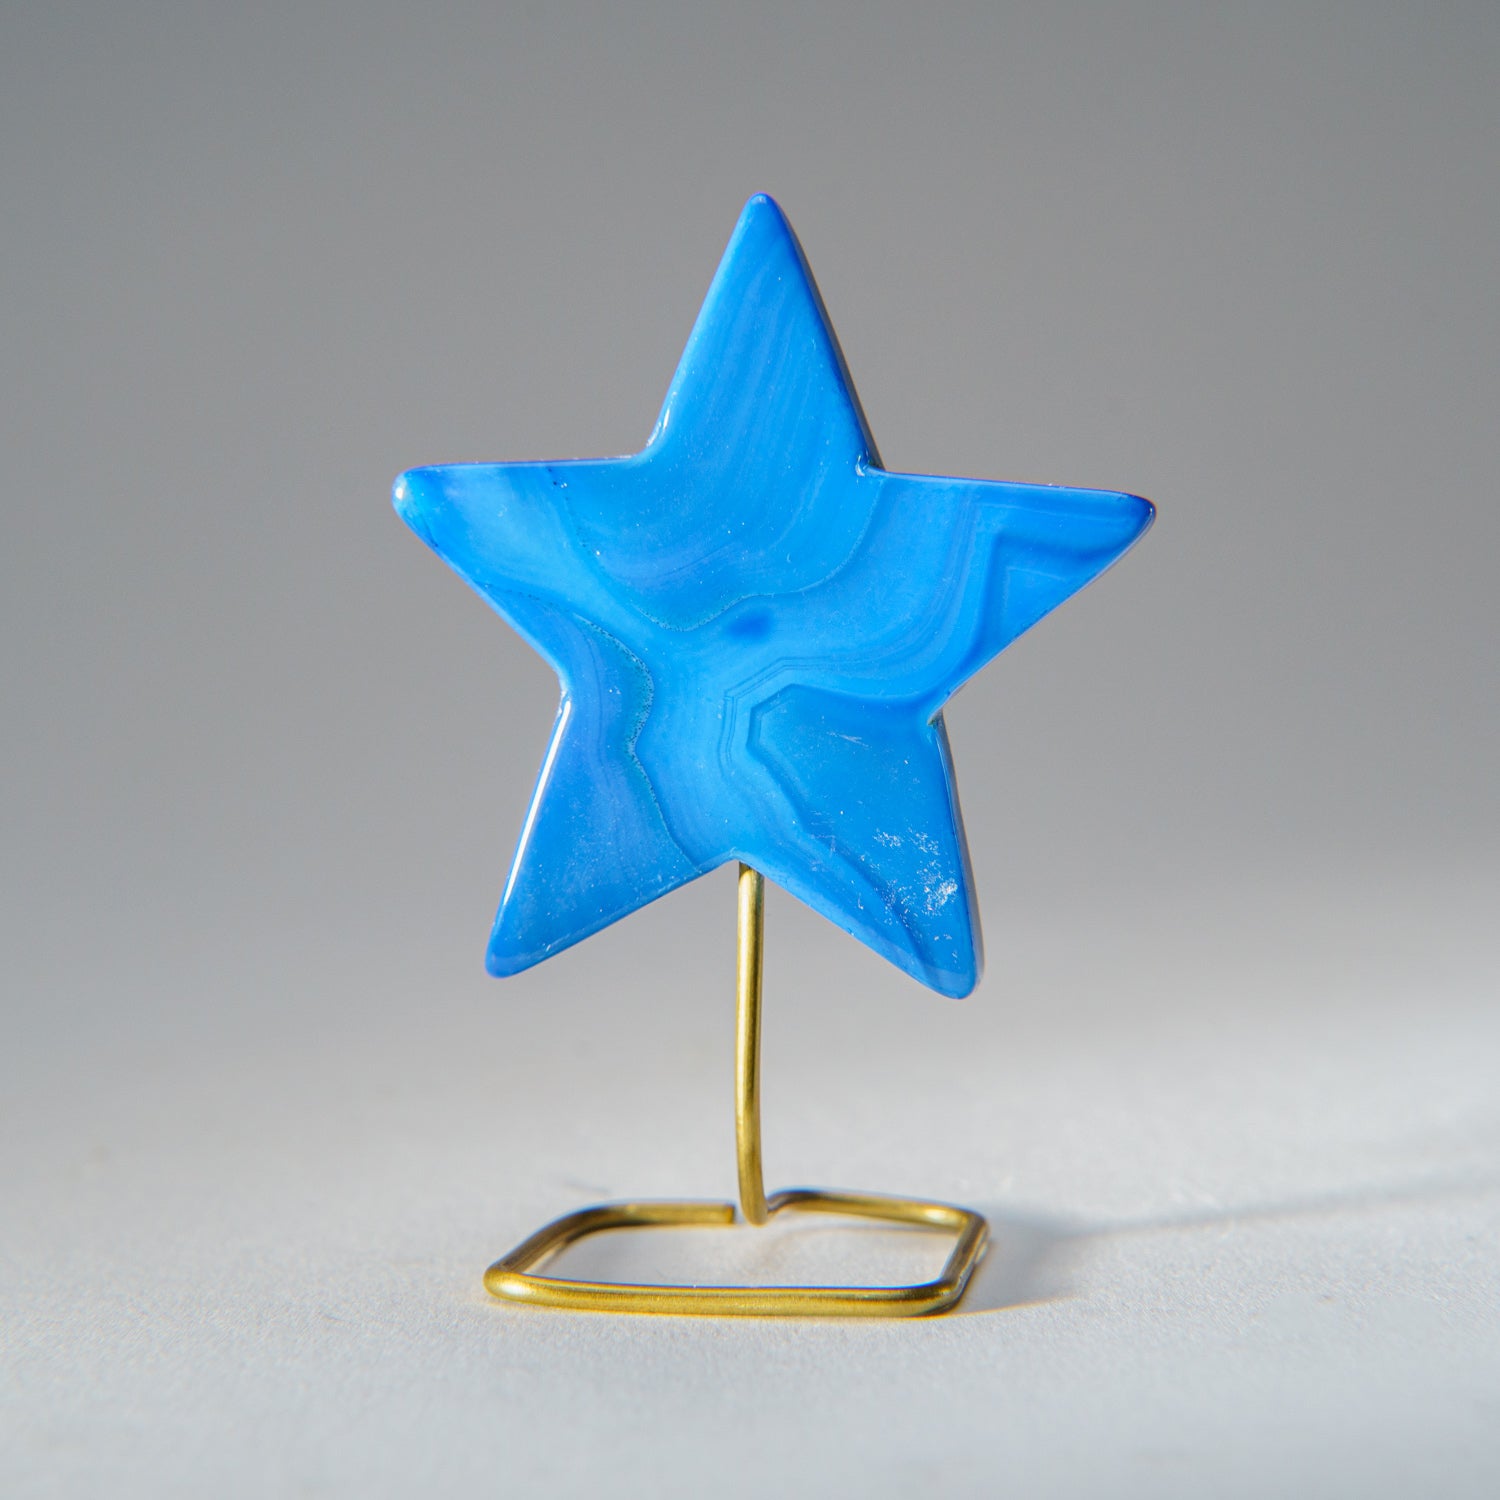 Polished Blue Agate Star on Custom Metal Stand (30 grams)